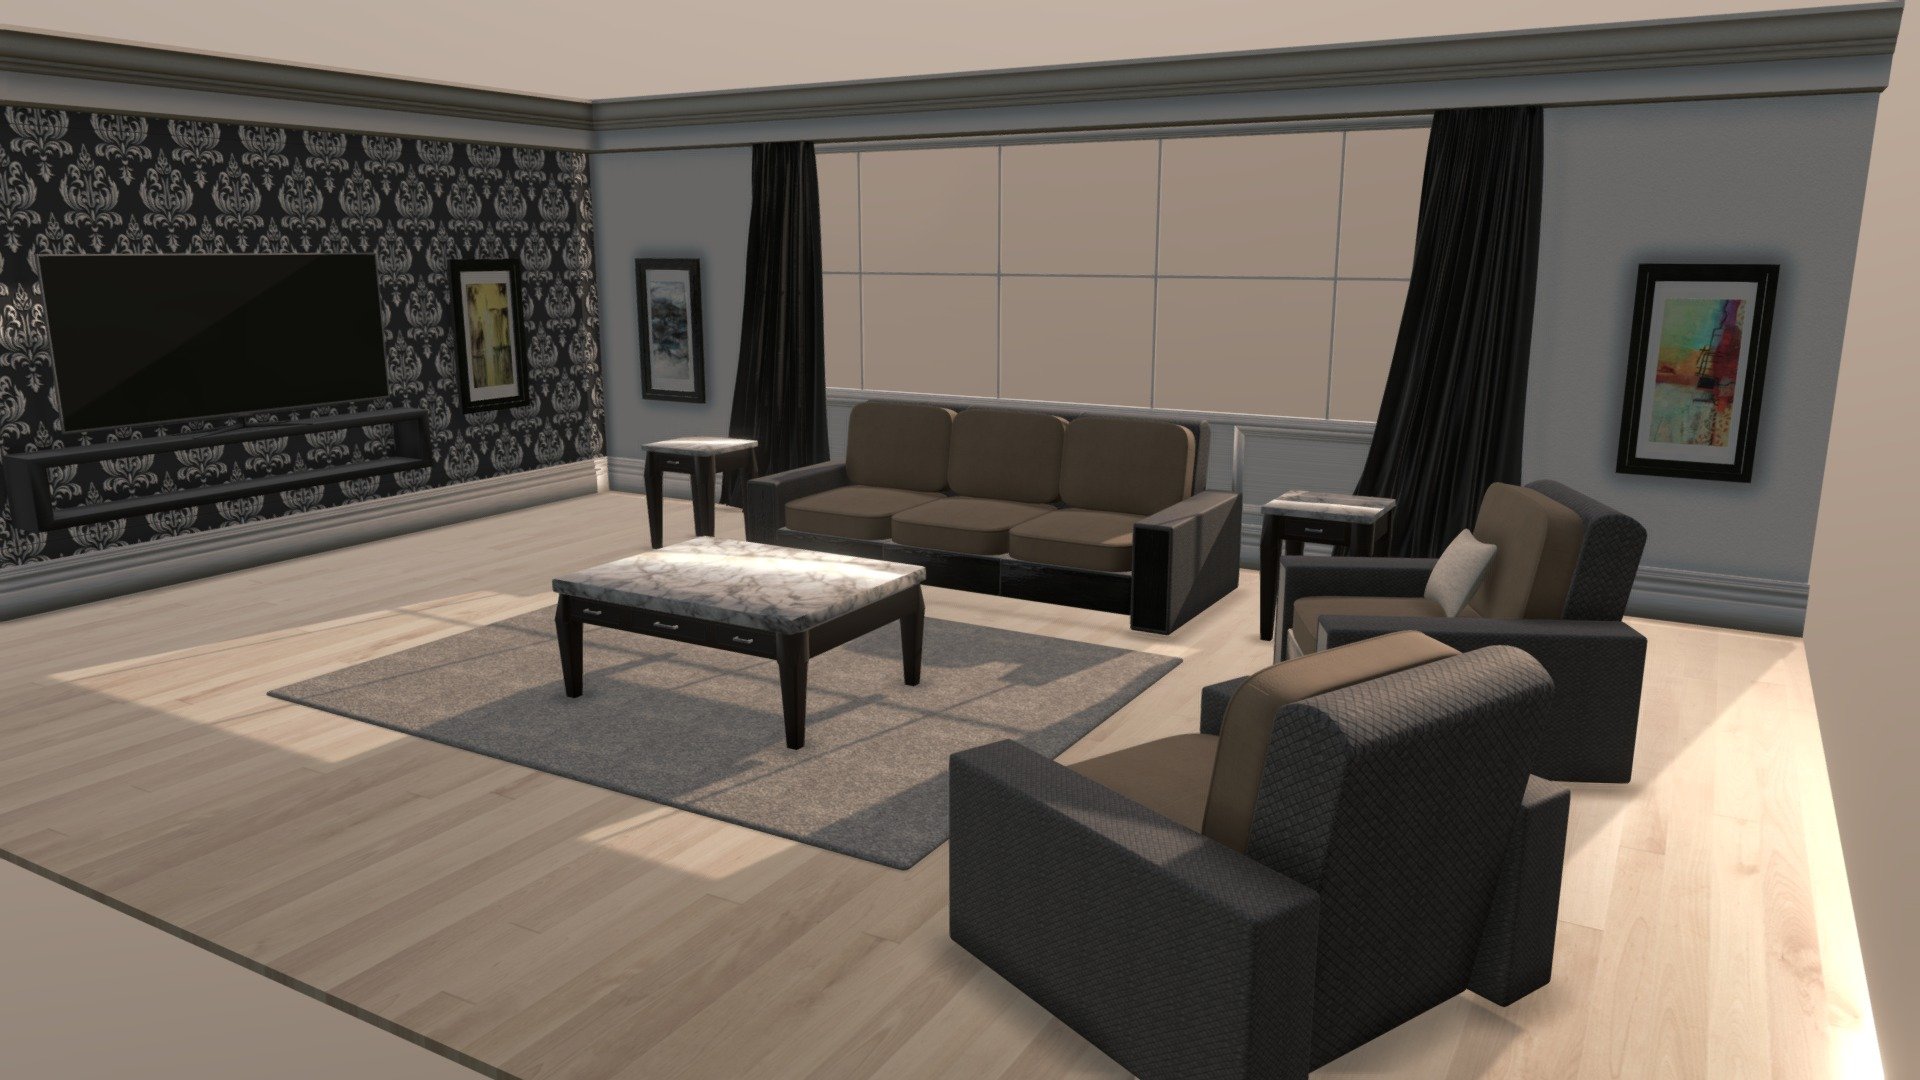 Model was done with a one week deadline for Diving Dove Studios, London, ON - Concept Living Room - 3D model by Johnny Rumeliotis (@rumeliotis) 3d model